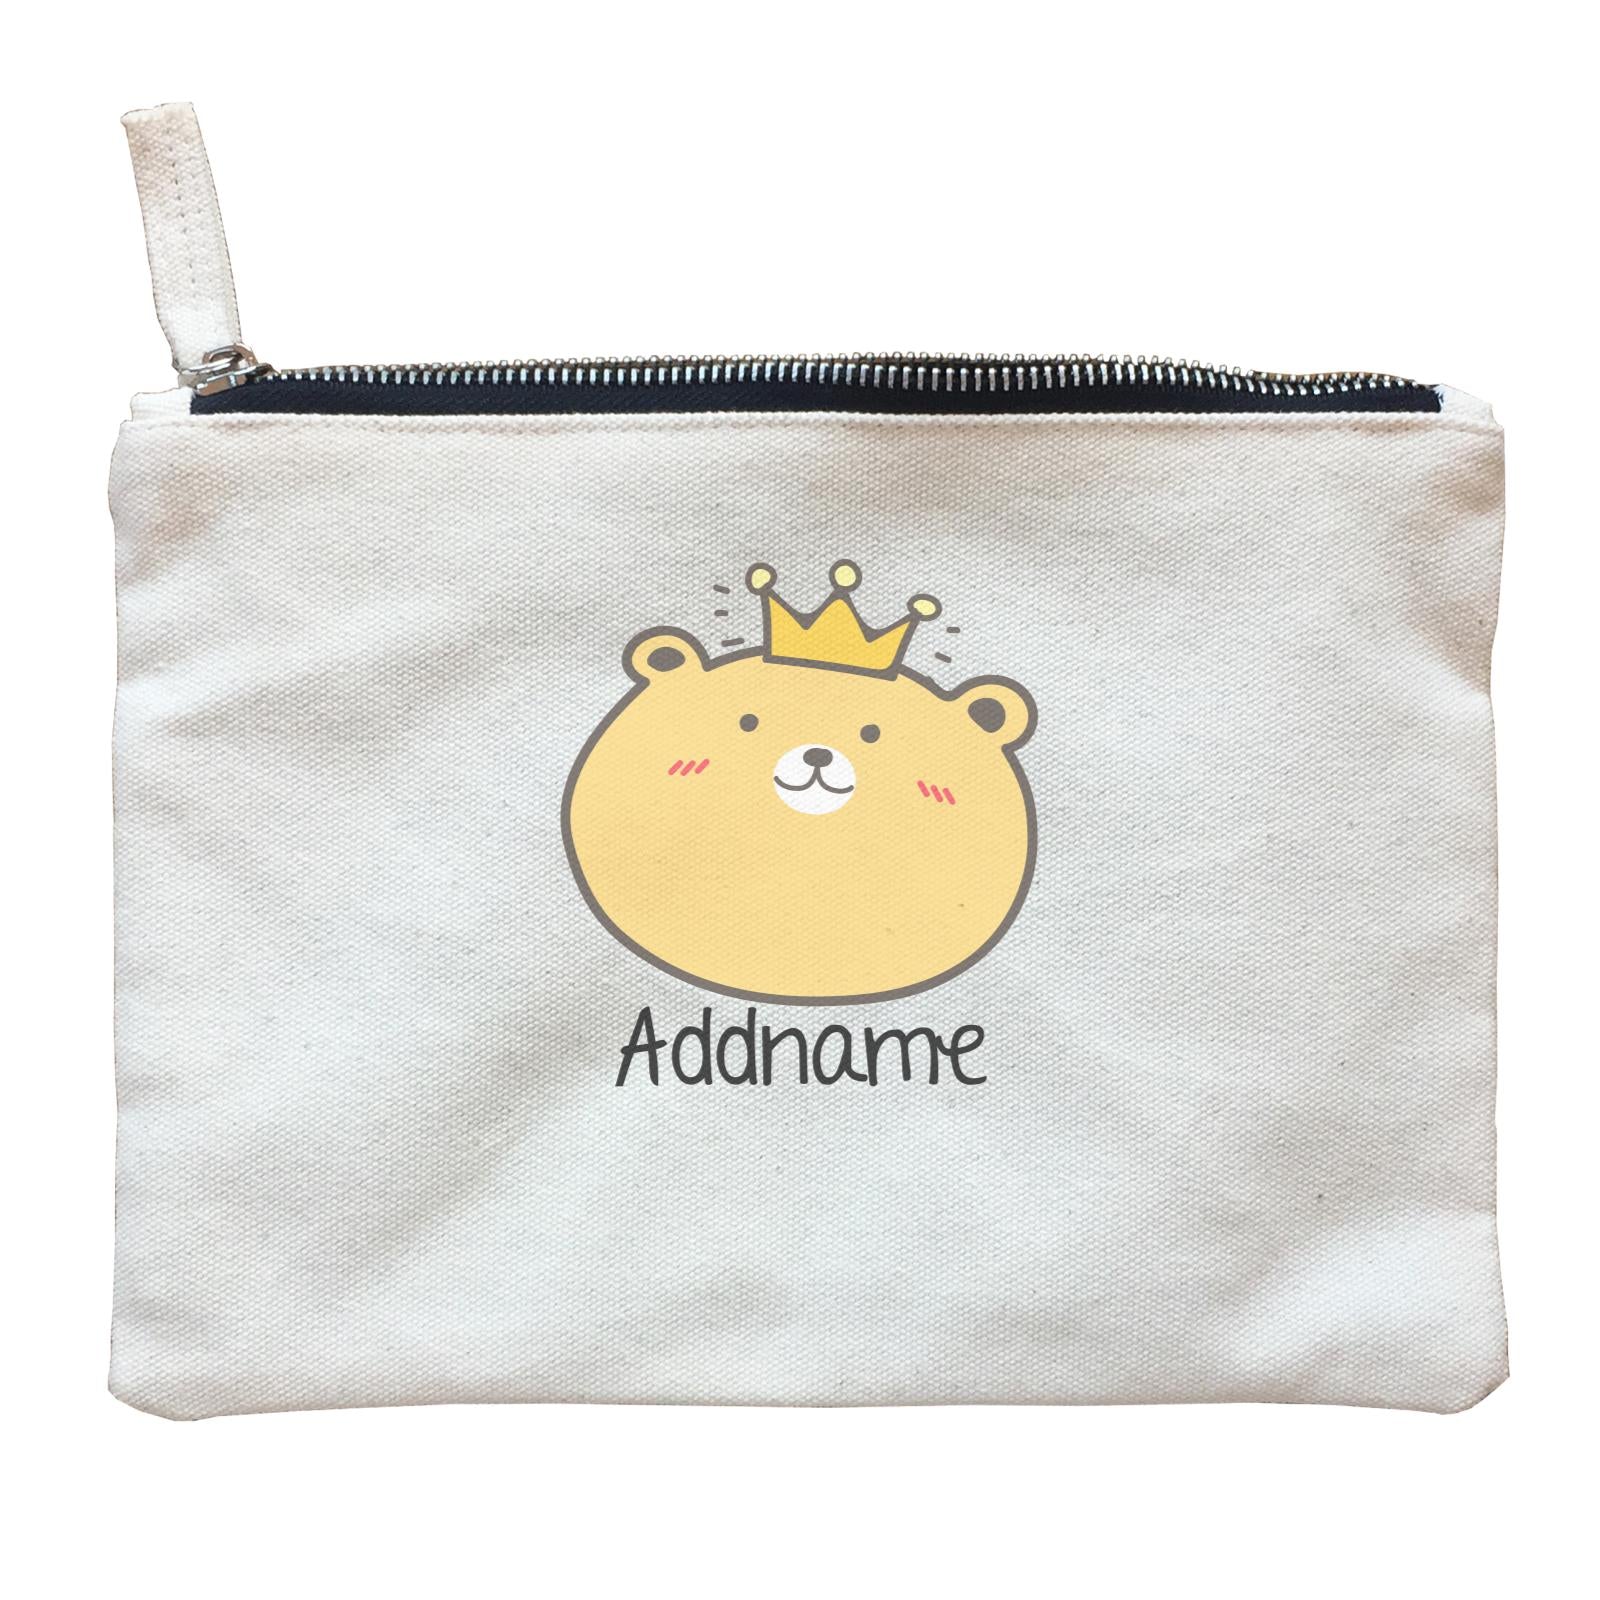 Cute Animals And Friends Series Cute Yellow Bear With Crown Addname Zipper Pouch